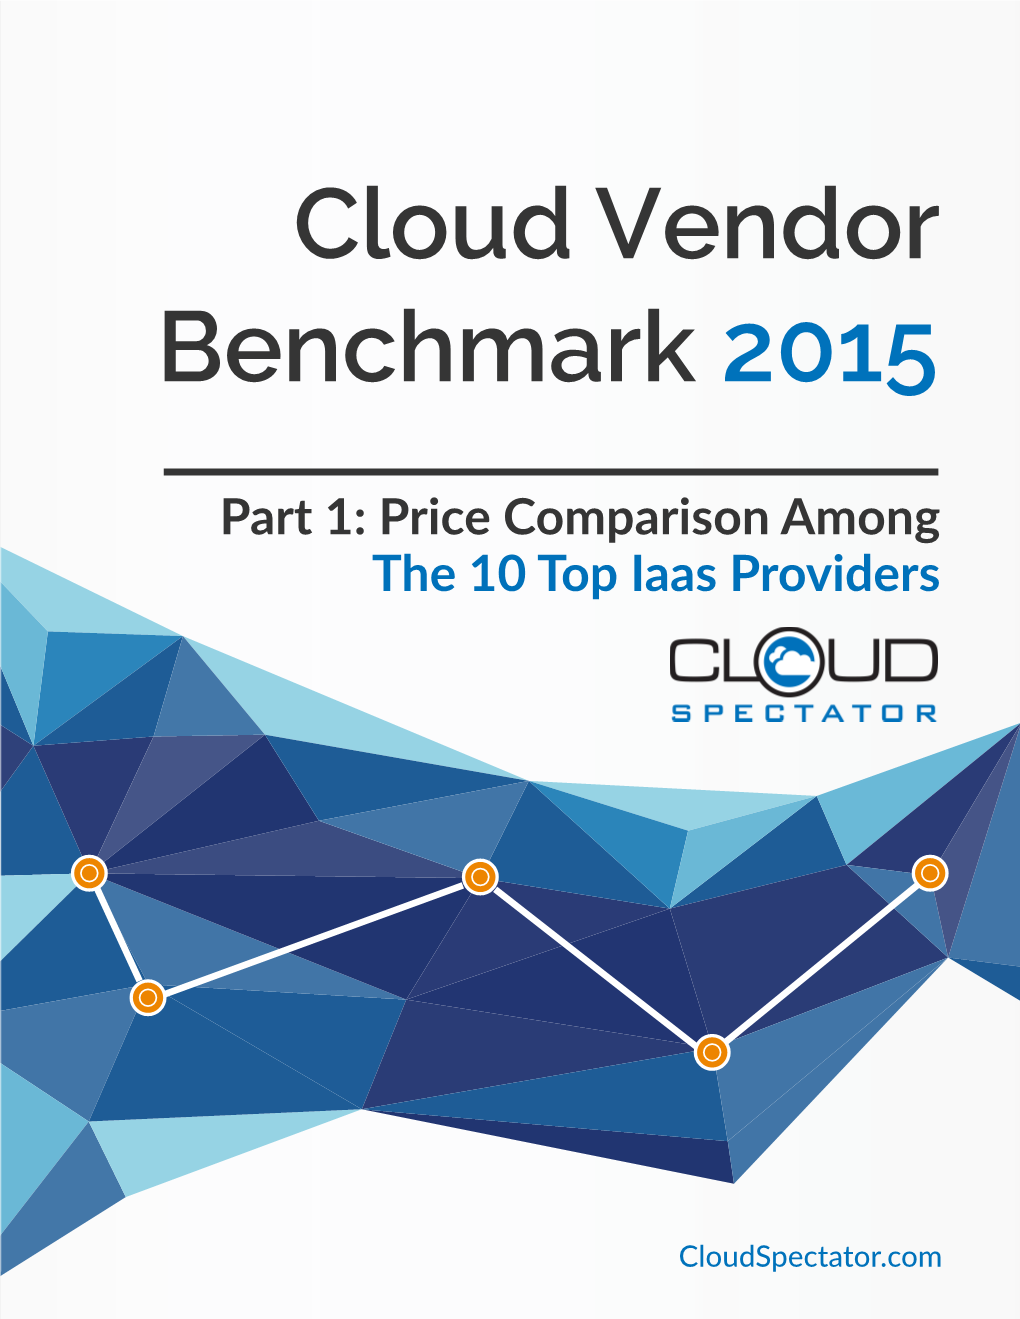 Part 1: Price Comparison Among the 10 Top Iaas Providers